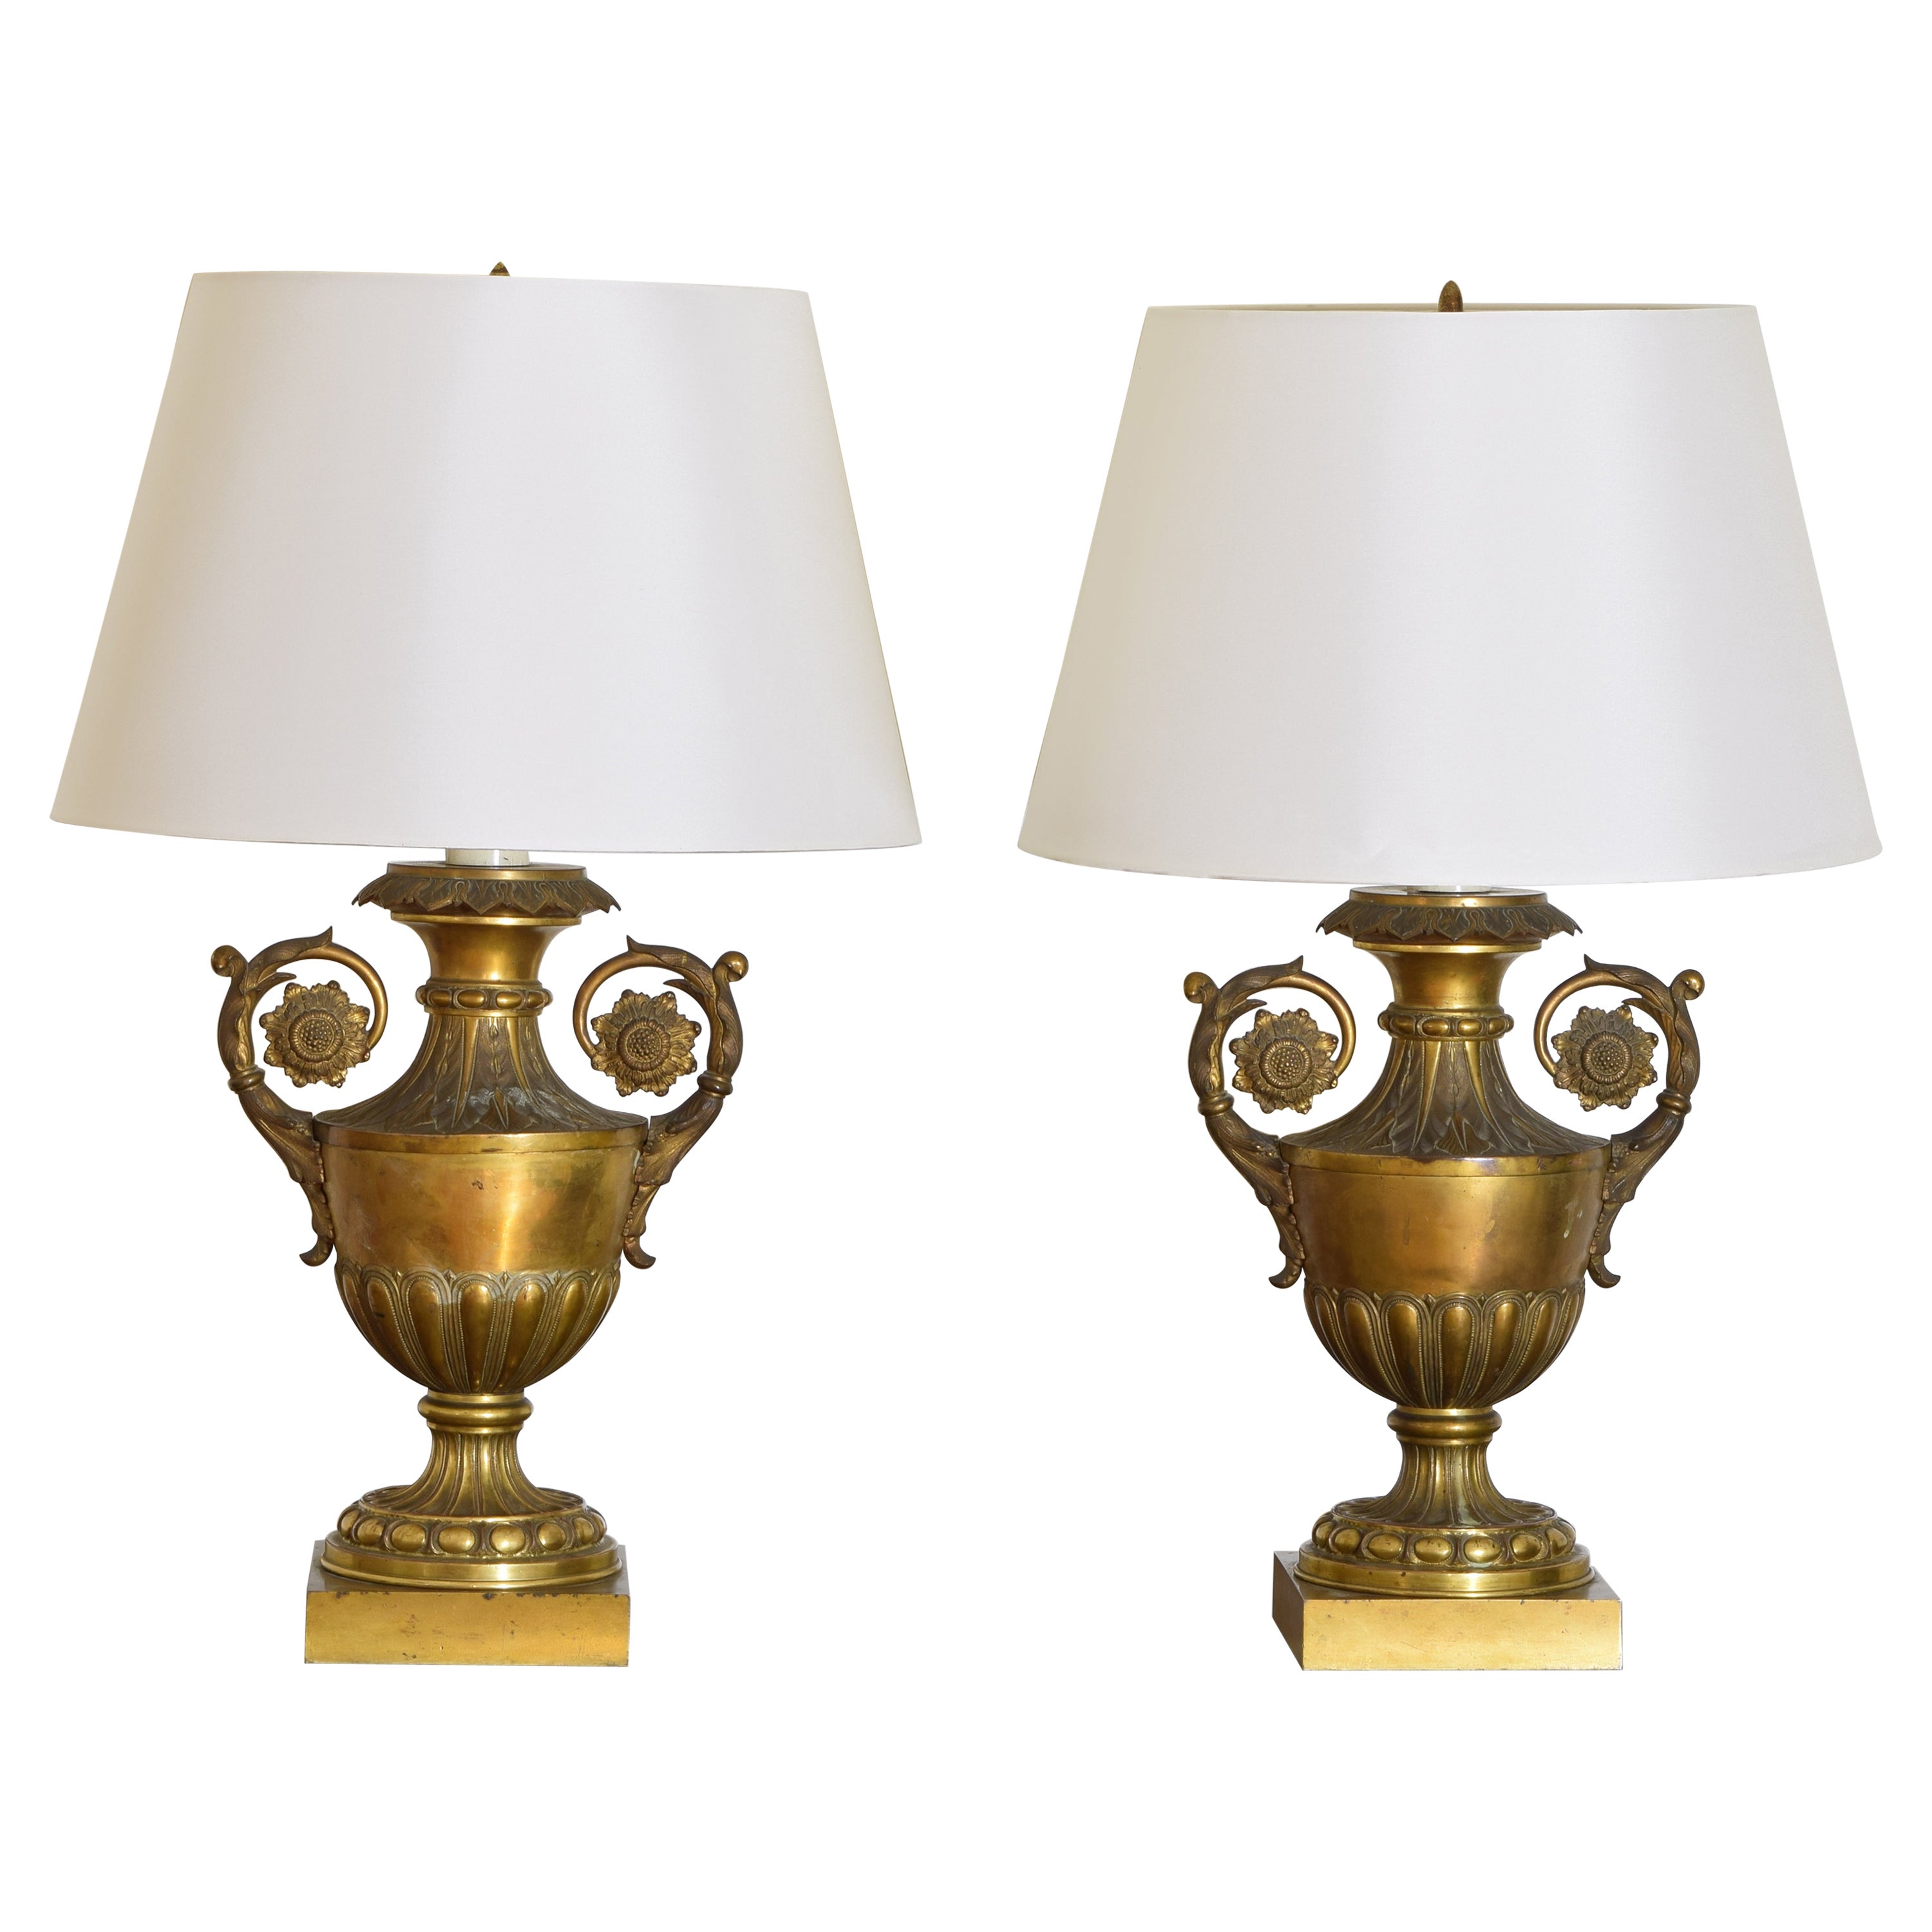 Pair of French Charles X Period Gilded Bronze Table Lamps, ca. 1825 For Sale